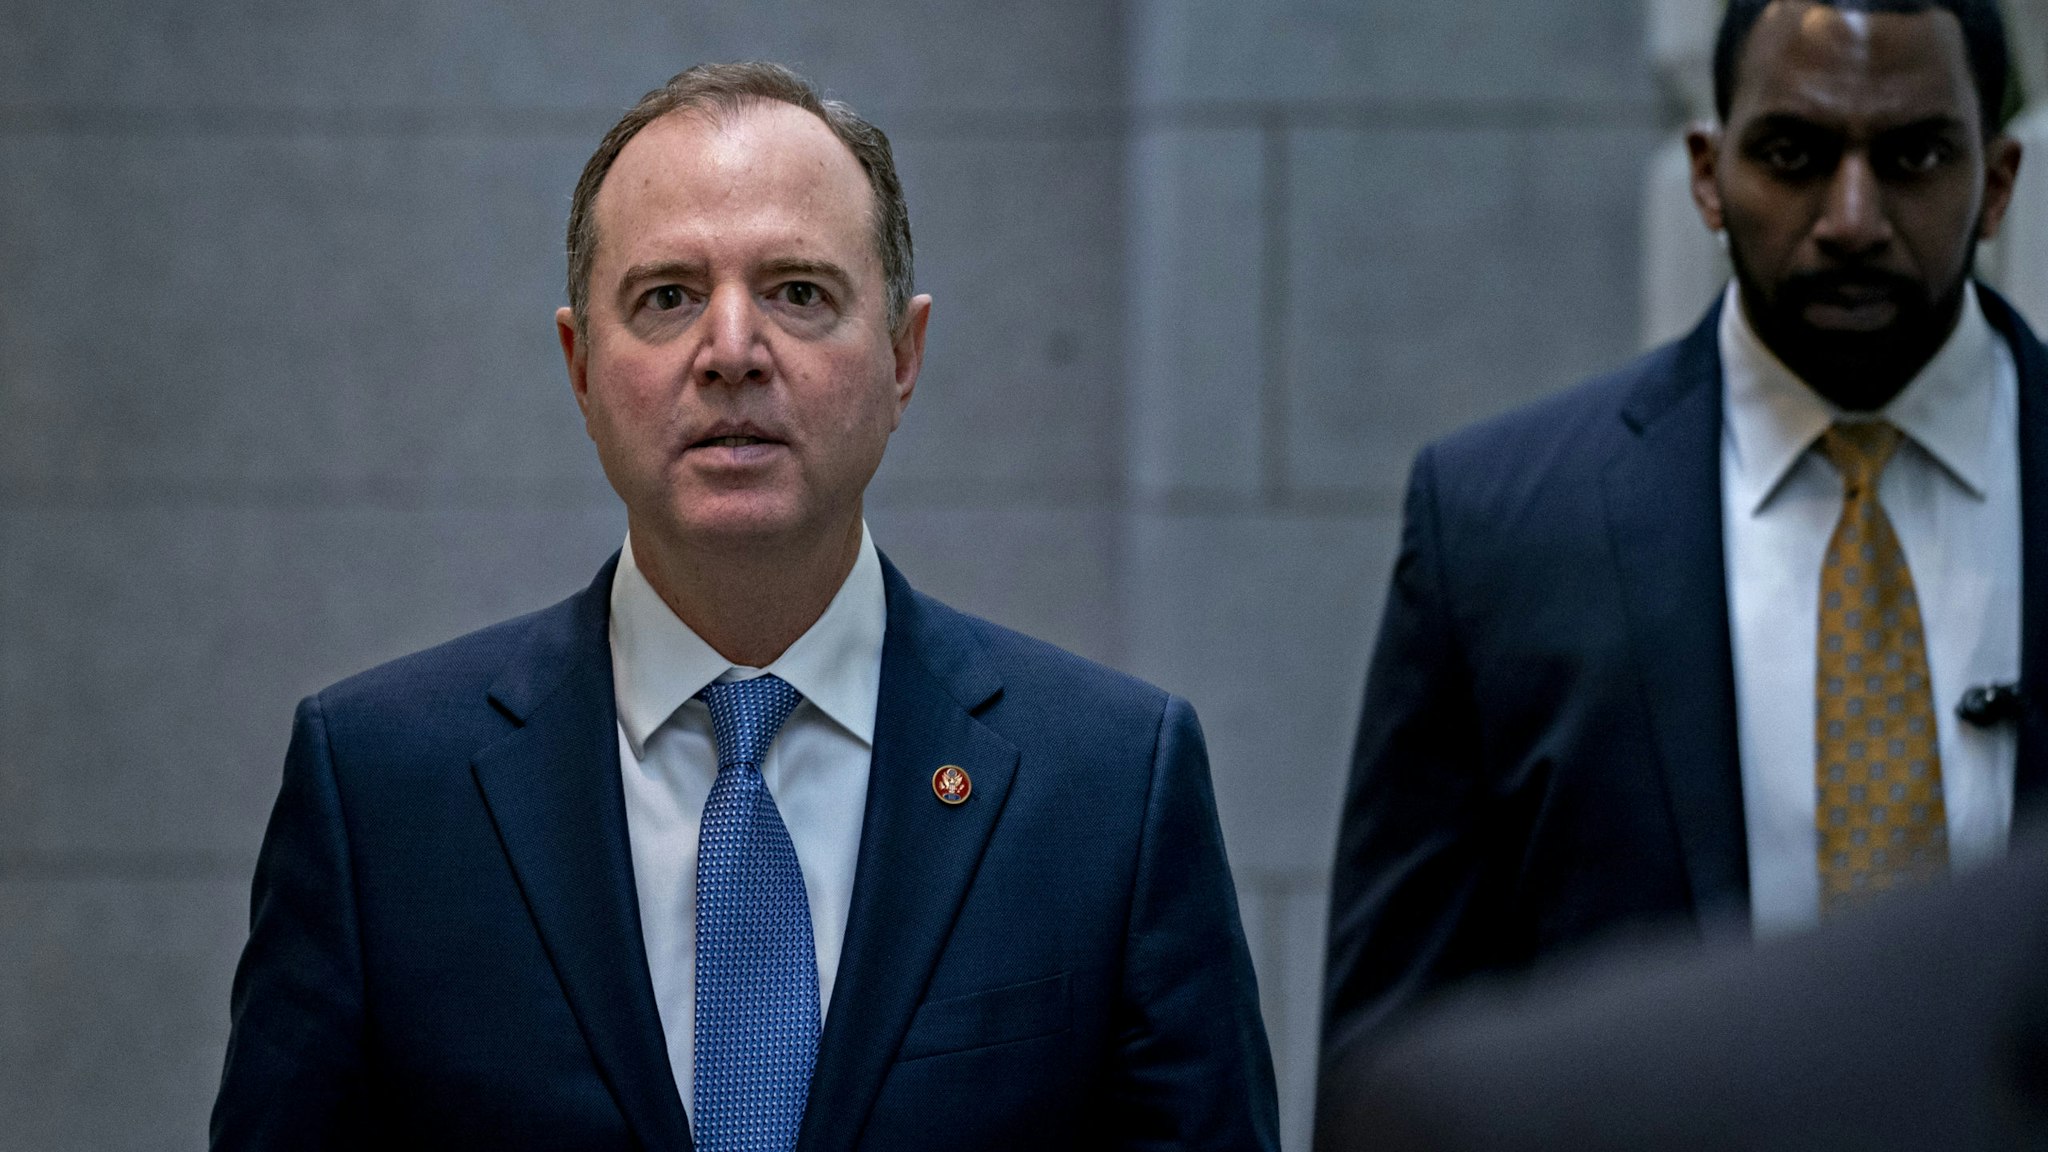 Representative Adam Schiff, a Democrat from California, arrives to a weekly Democratic caucus meeting at the U.S. Capitol in Washington, D.C., U.S., on Wednesday, Feb. 5, 2020. President Donald Trump's inevitable acquittal in the Senate's impeachment trial today has some House Democrats fretting that they should have delivered a more complete case to argue for his removal. Photographer: Andrew Harrer/Bloomberg via Getty Images